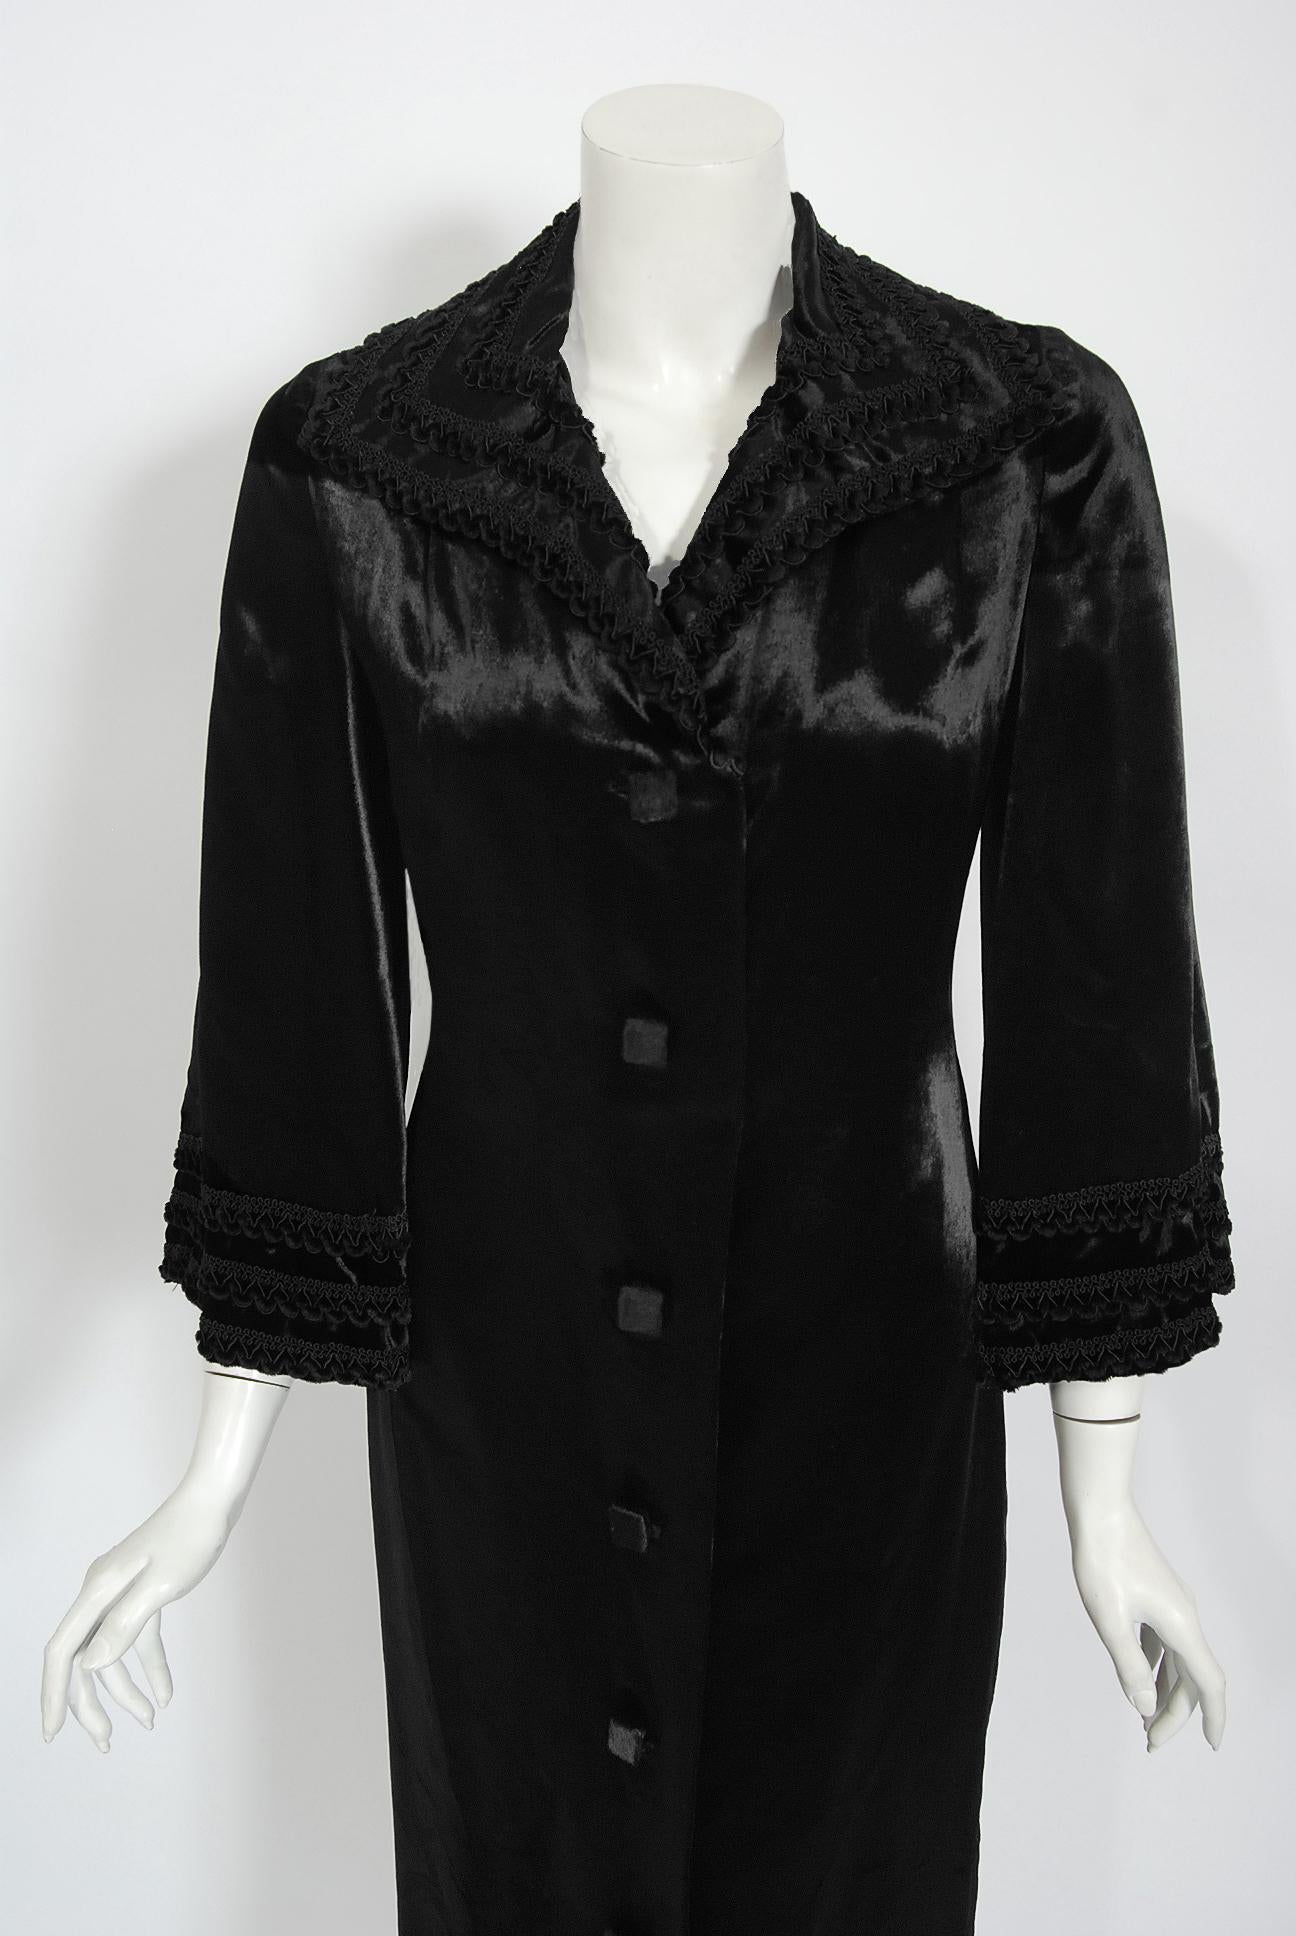 Breathtaking Yves Saint Laurent Haute-Couture numbered jacket from his iconic 1986 Fall-Winter collection.  The fabric is a luxurious silk-lined pony hair with bold embroidered silk-cord trimming. This beauty is insanely chic with it's nod to